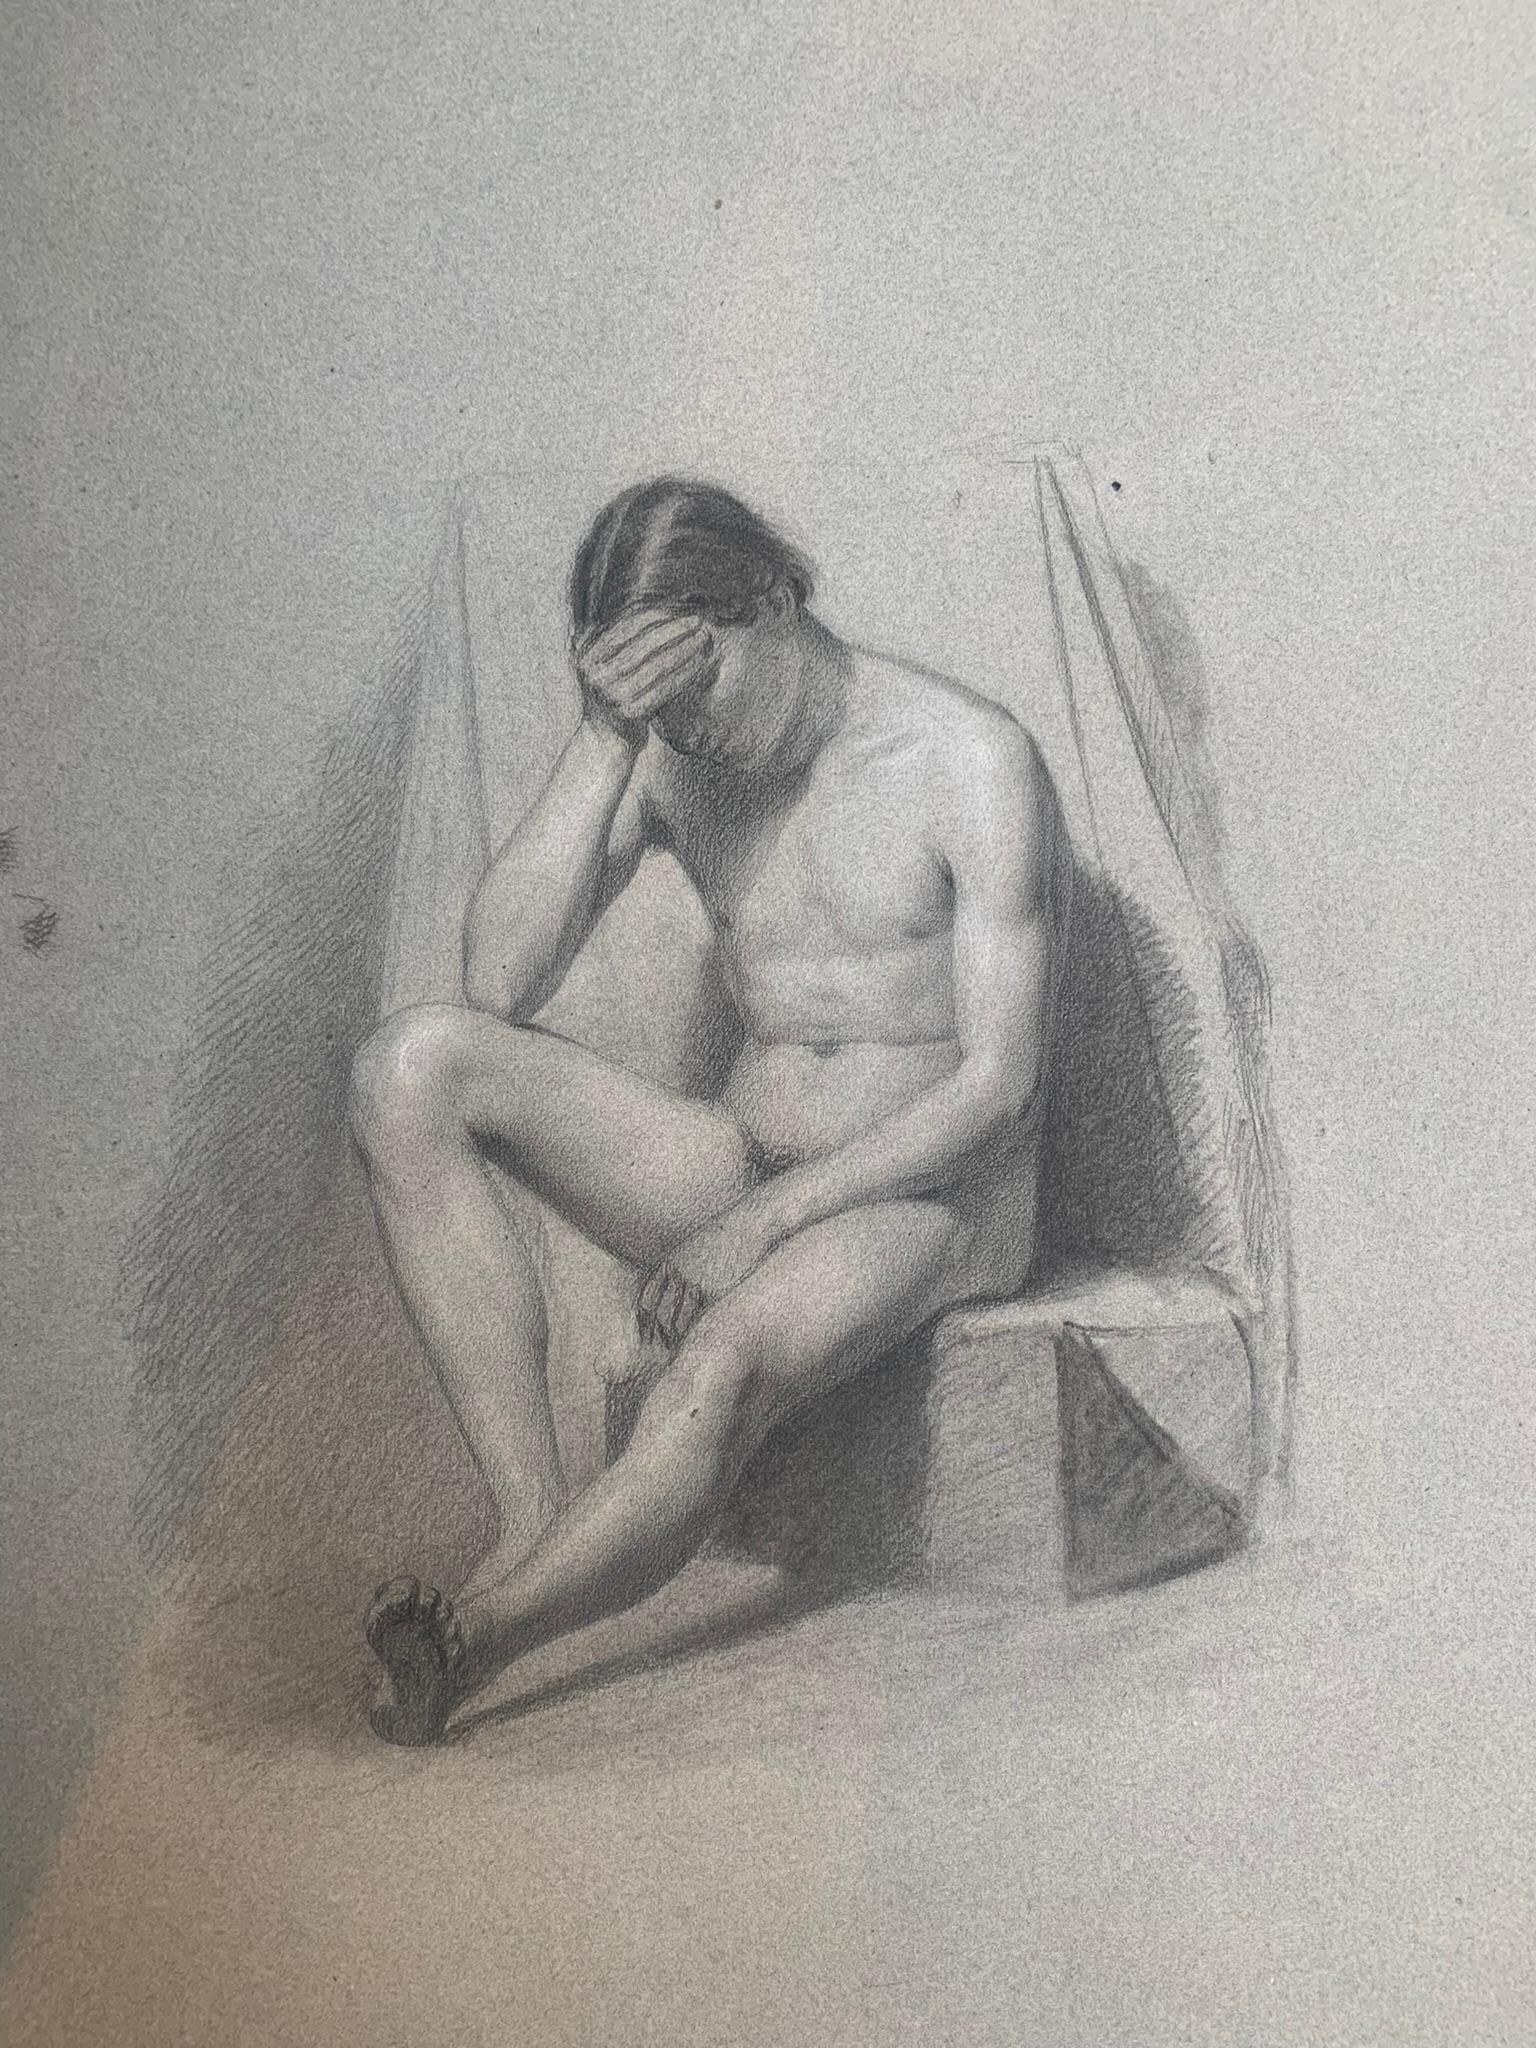 Charcoal drawing on light gray-blue colored paper.
The drawing depicts a young man sitting with the
hand on forehead. the position is probably meant to express the feeling of regret, or sadness.
In the academic preparation of painters, drawing